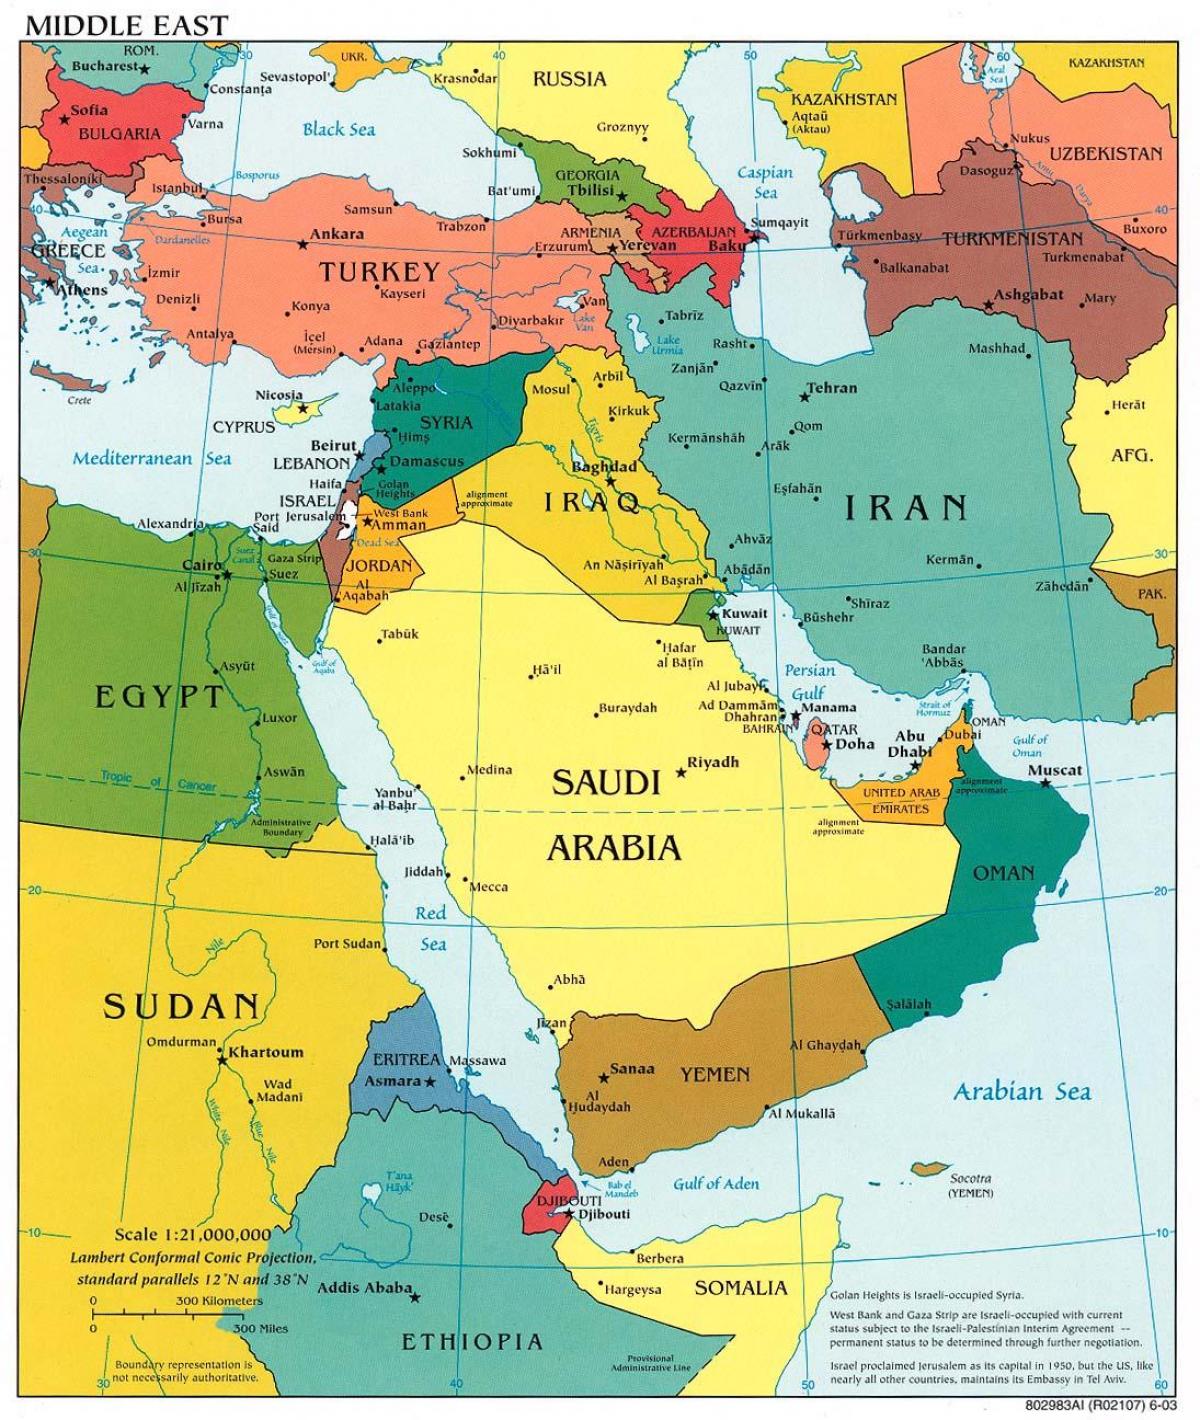 Bahrain on middle east map